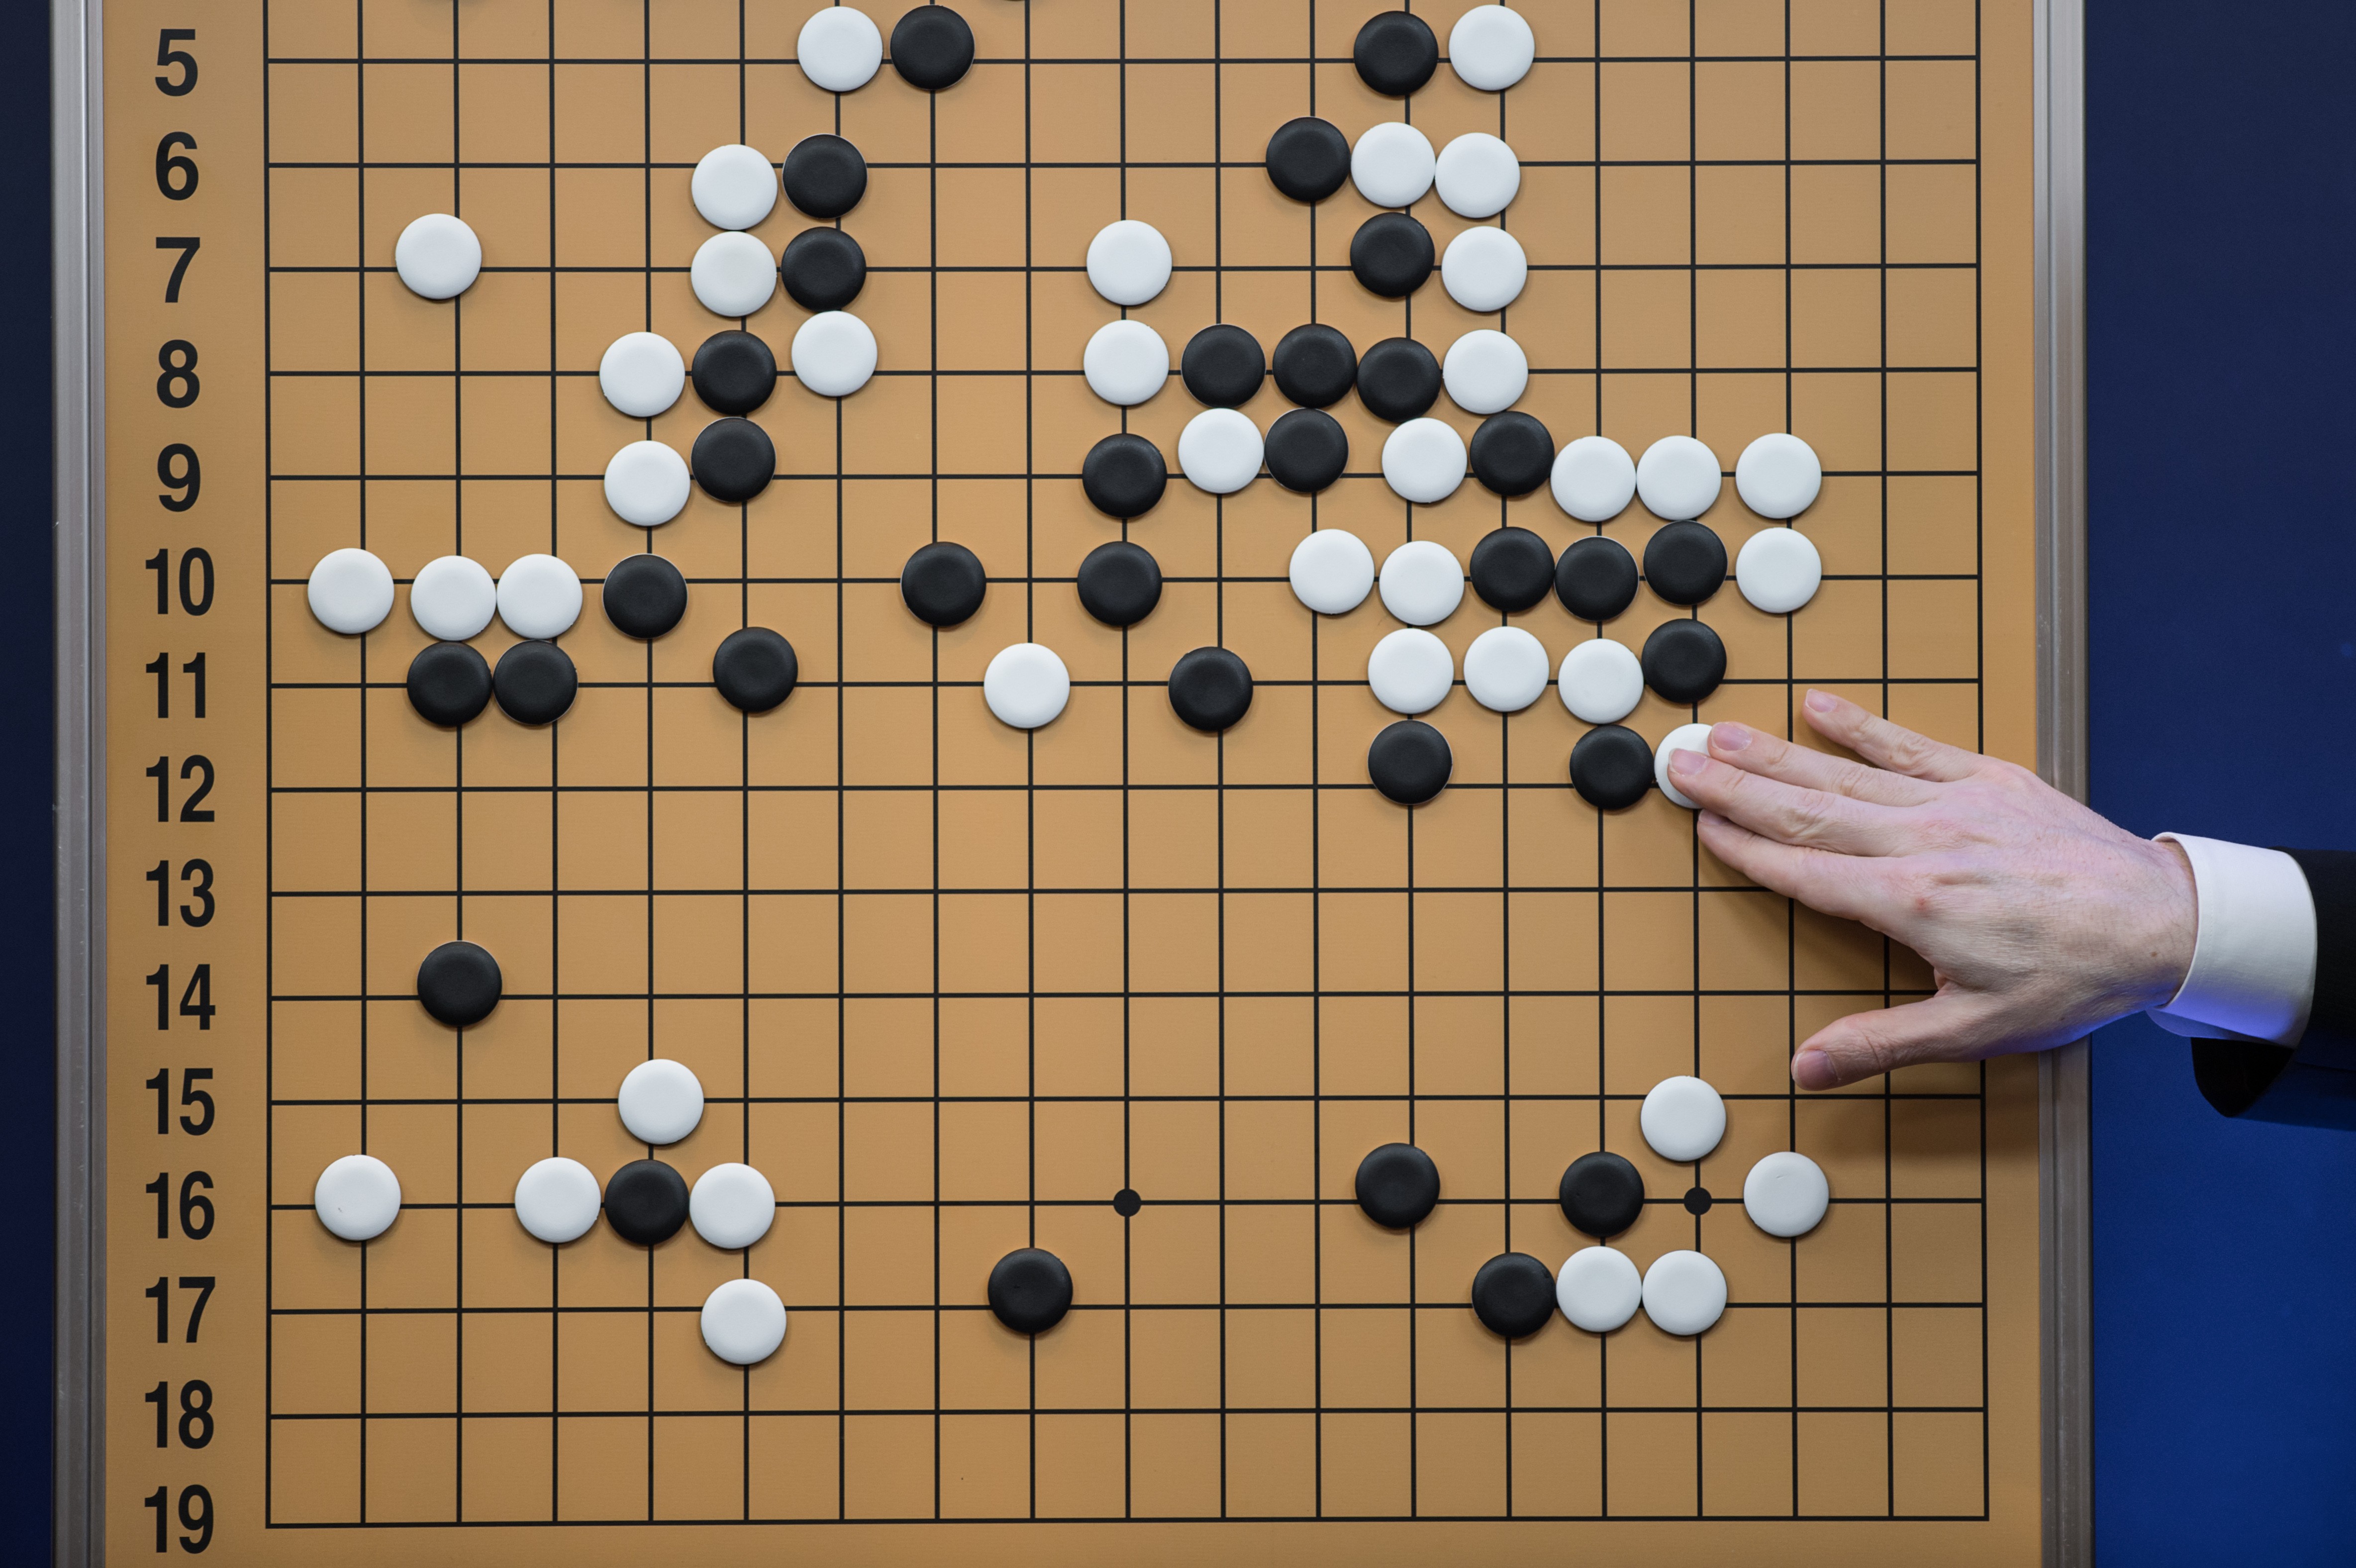 As Google DeepMind’s programme prepares for its match with Chinese Go grandmaster Ke Jie, is it time to sit back and let the computers take over?